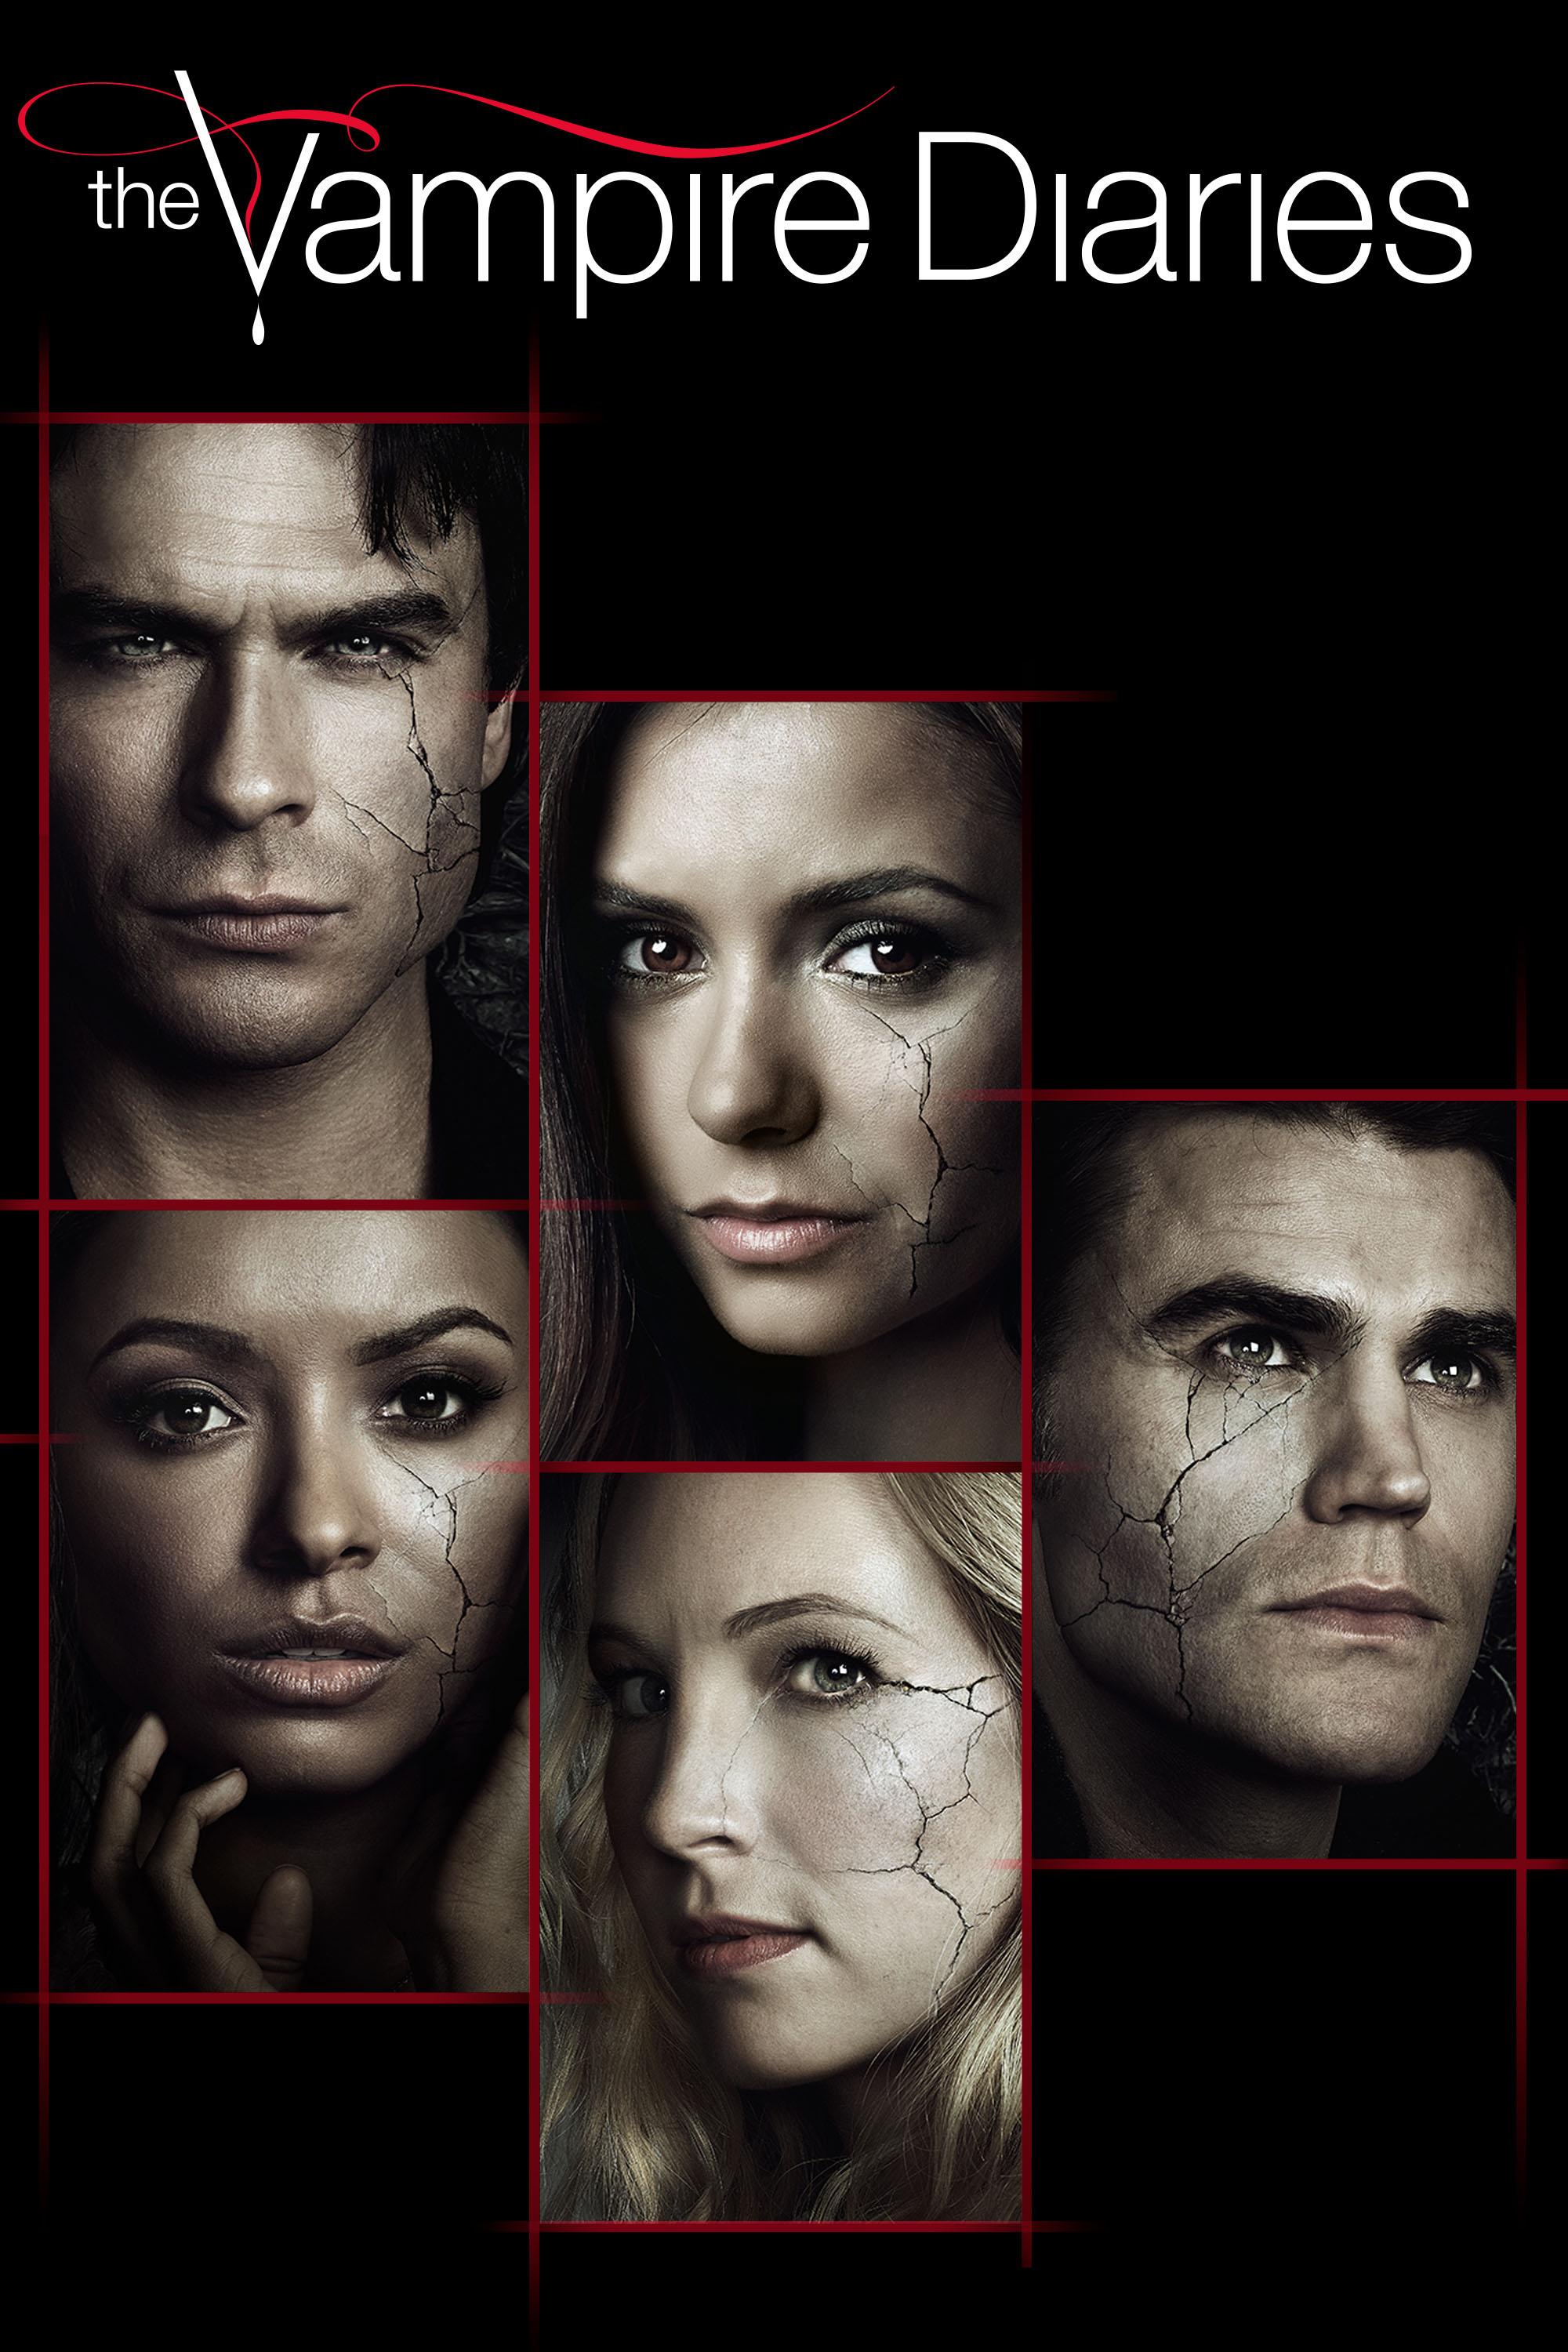 The Vampire Diaries. Buy, Rent or Watch on FandangoNOW